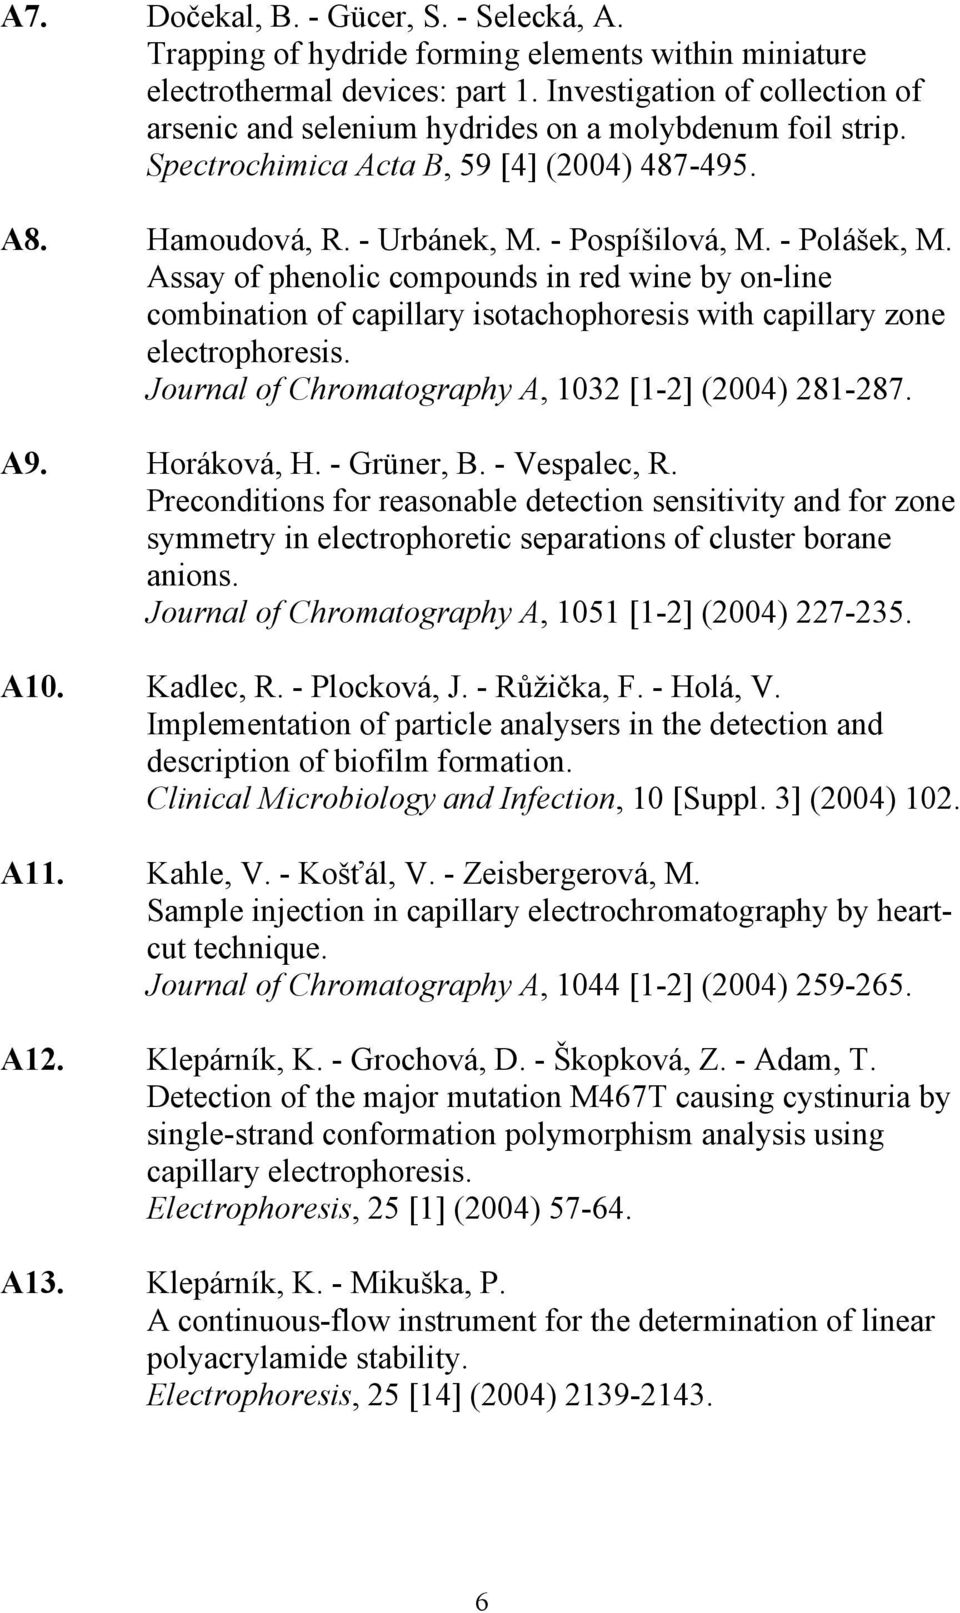 Assay of phenolic compounds in red wine by on-line combination of capillary isotachophoresis with capillary zone electrophoresis. Journal of Chromatography A, 1032 [1-2] (2004) 281-287. A9.